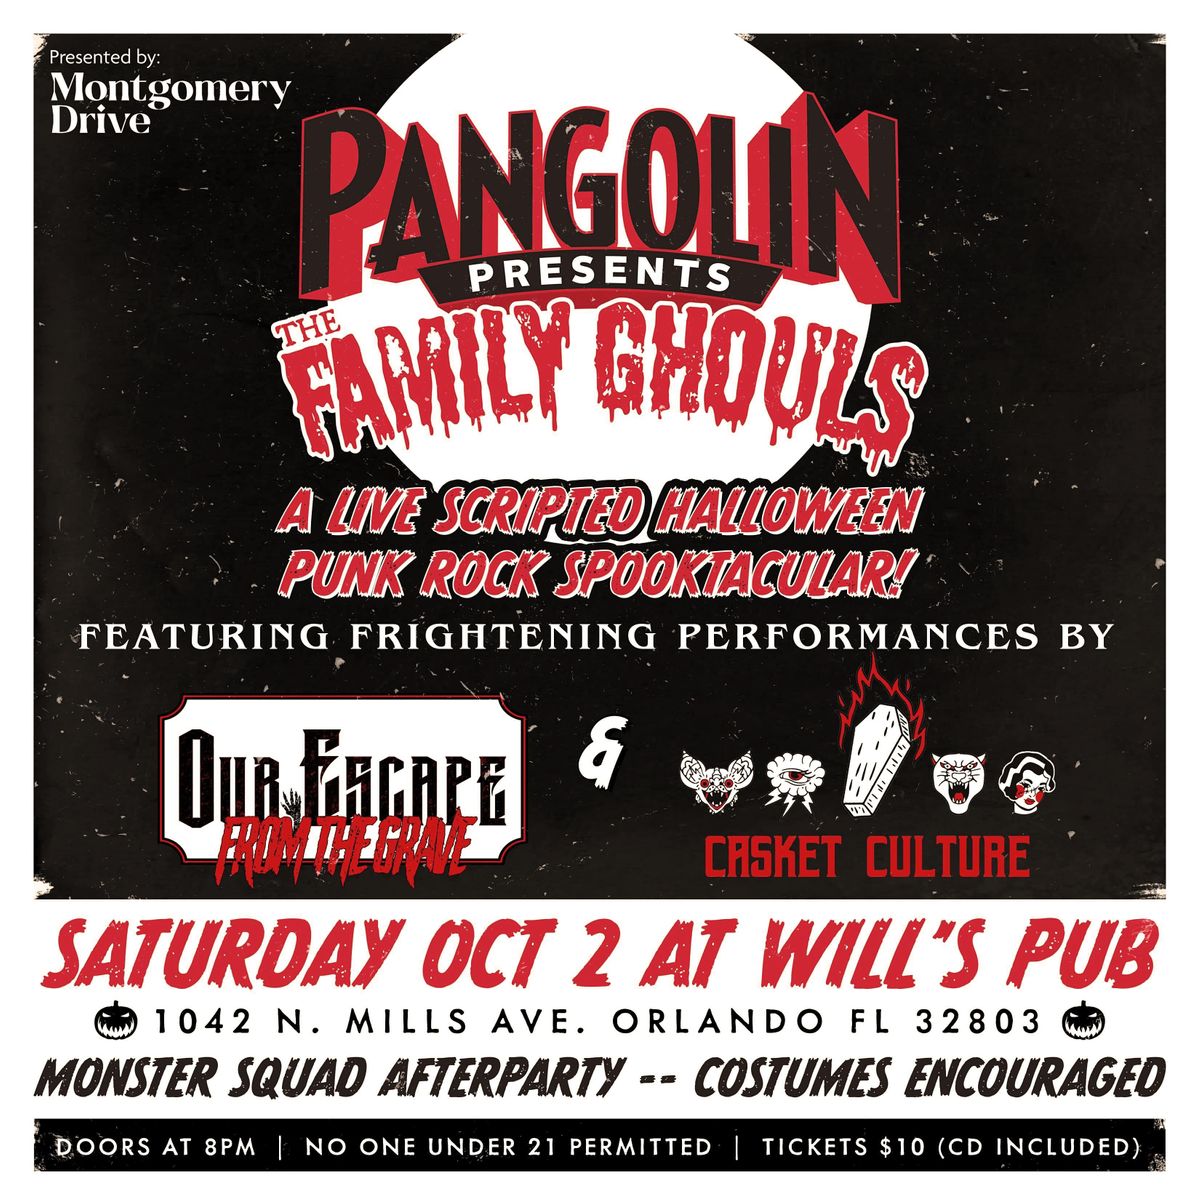 Pangolin presents THE FAMILY GHOULS w\/ Our Escape, and Casket Culture